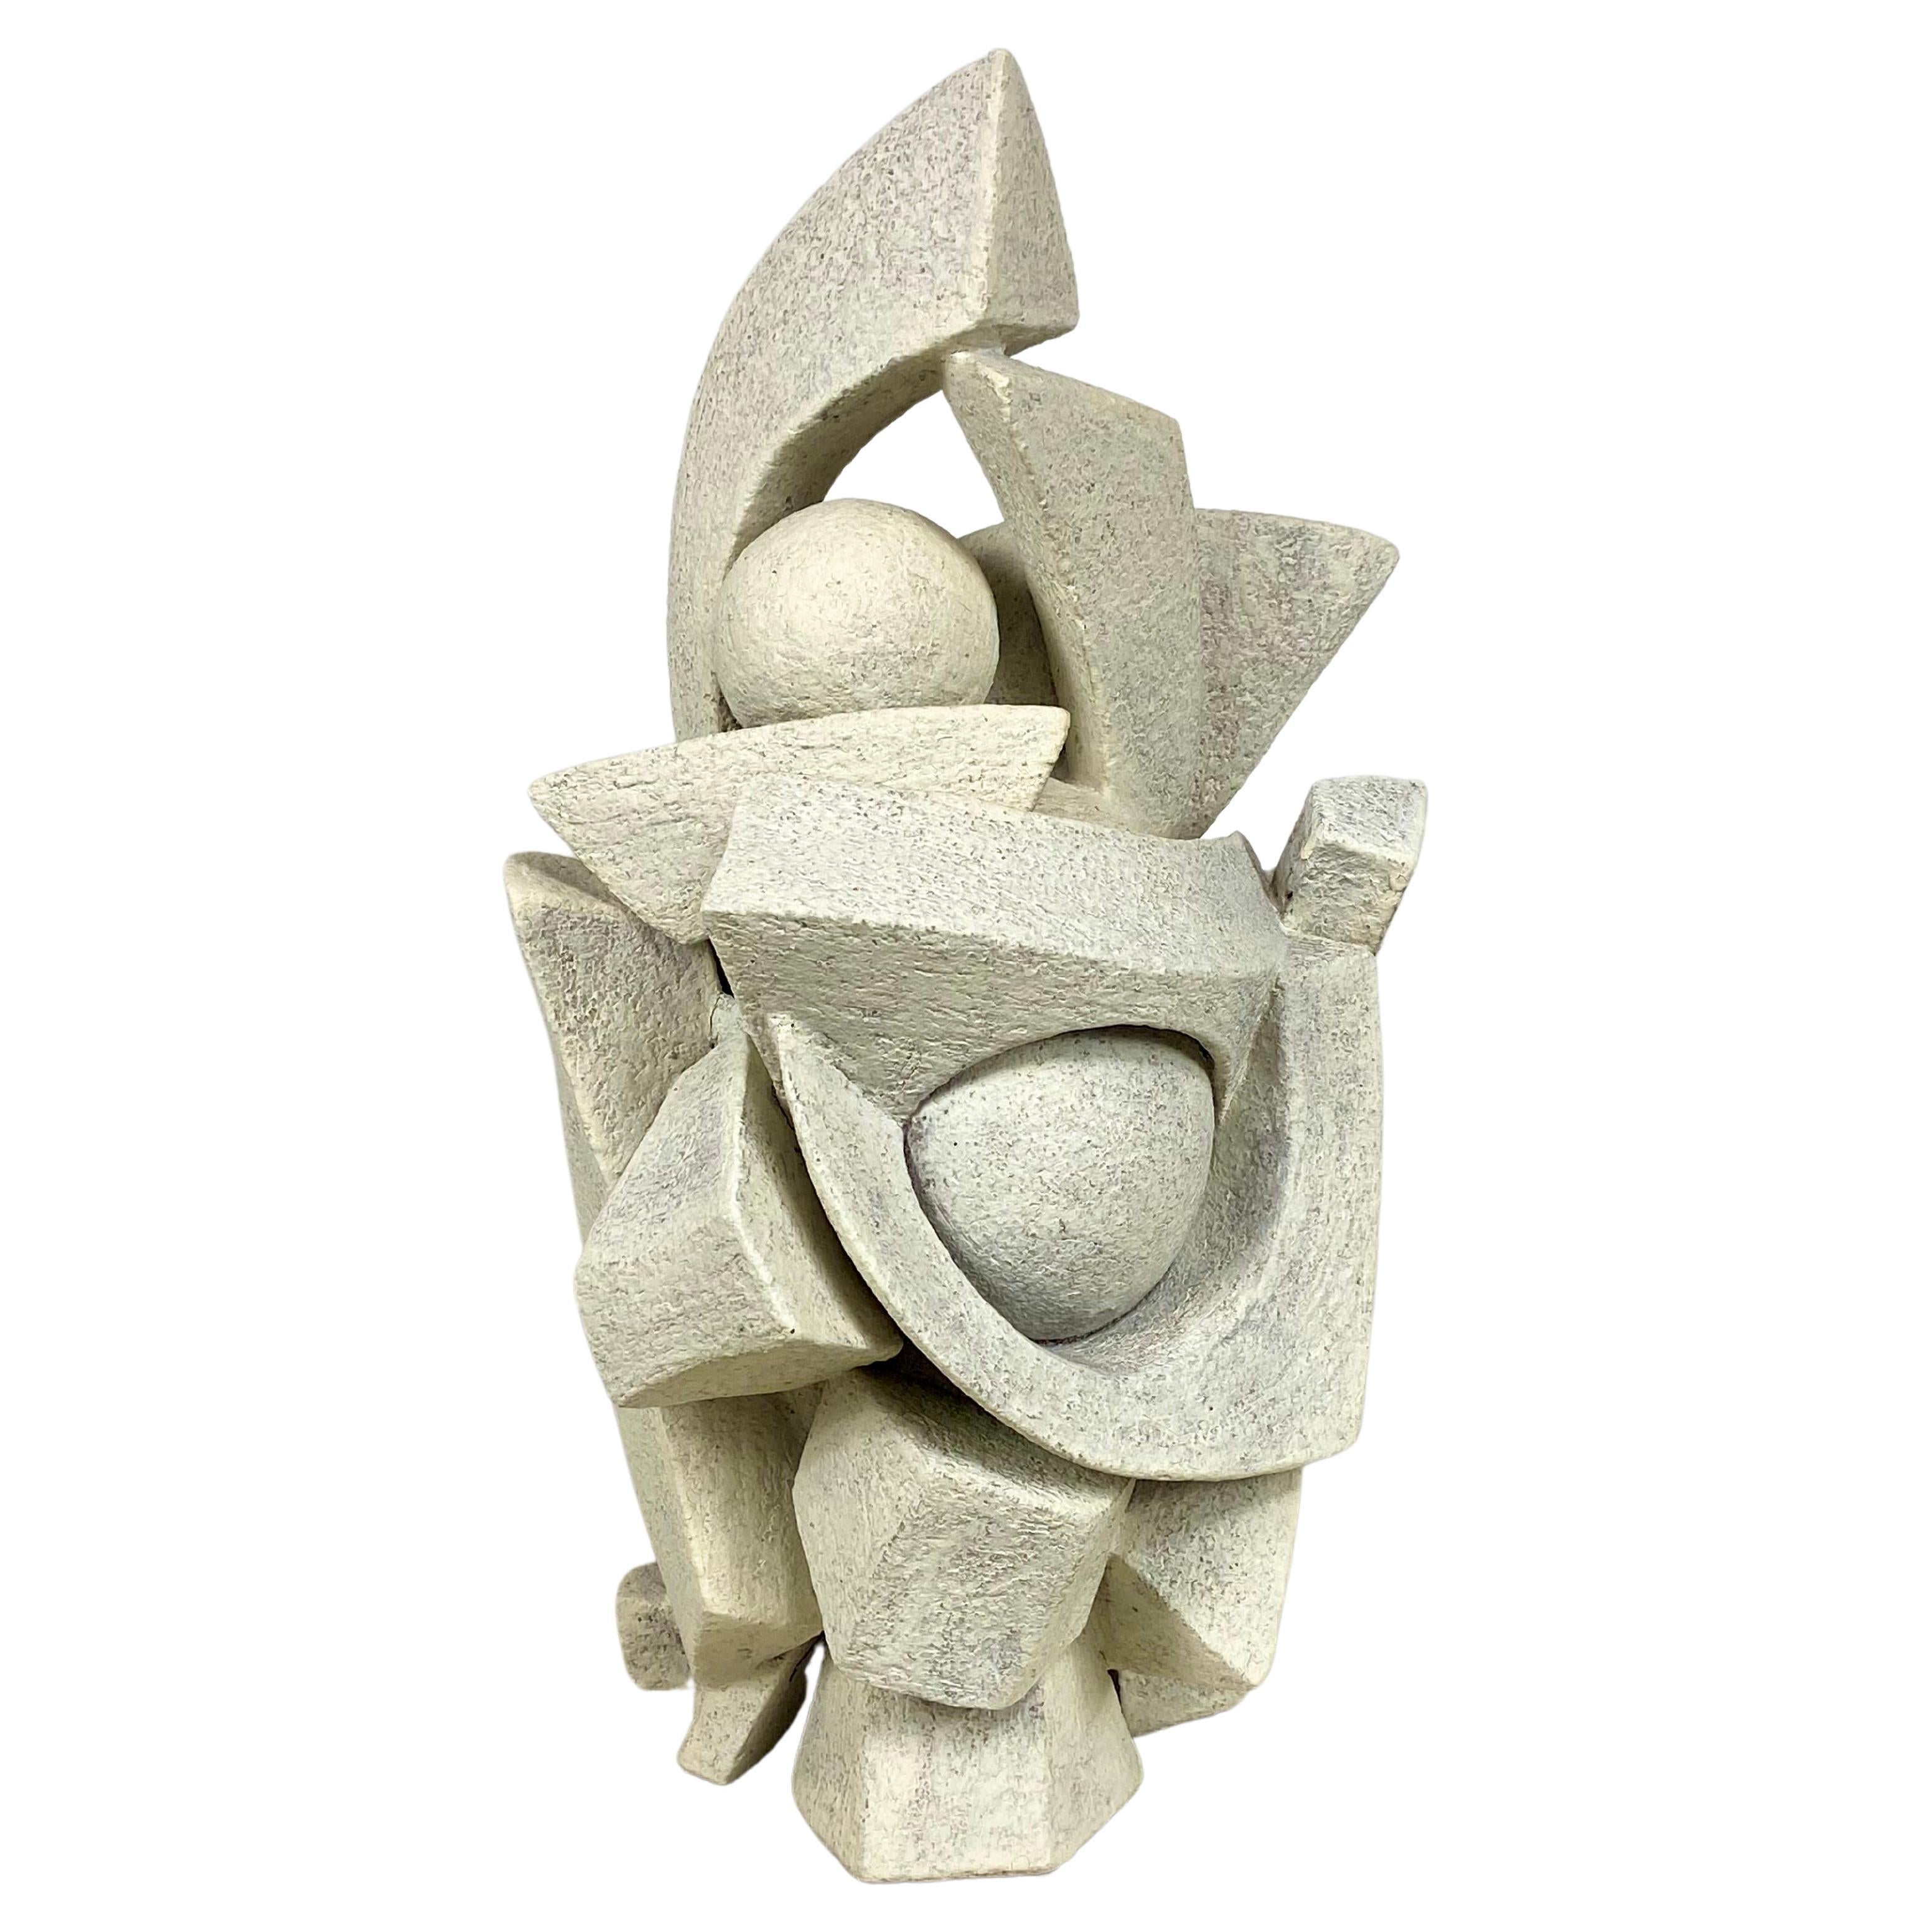 Modernist Abstract Ceramic Sculpture by Titia Estes For Sale